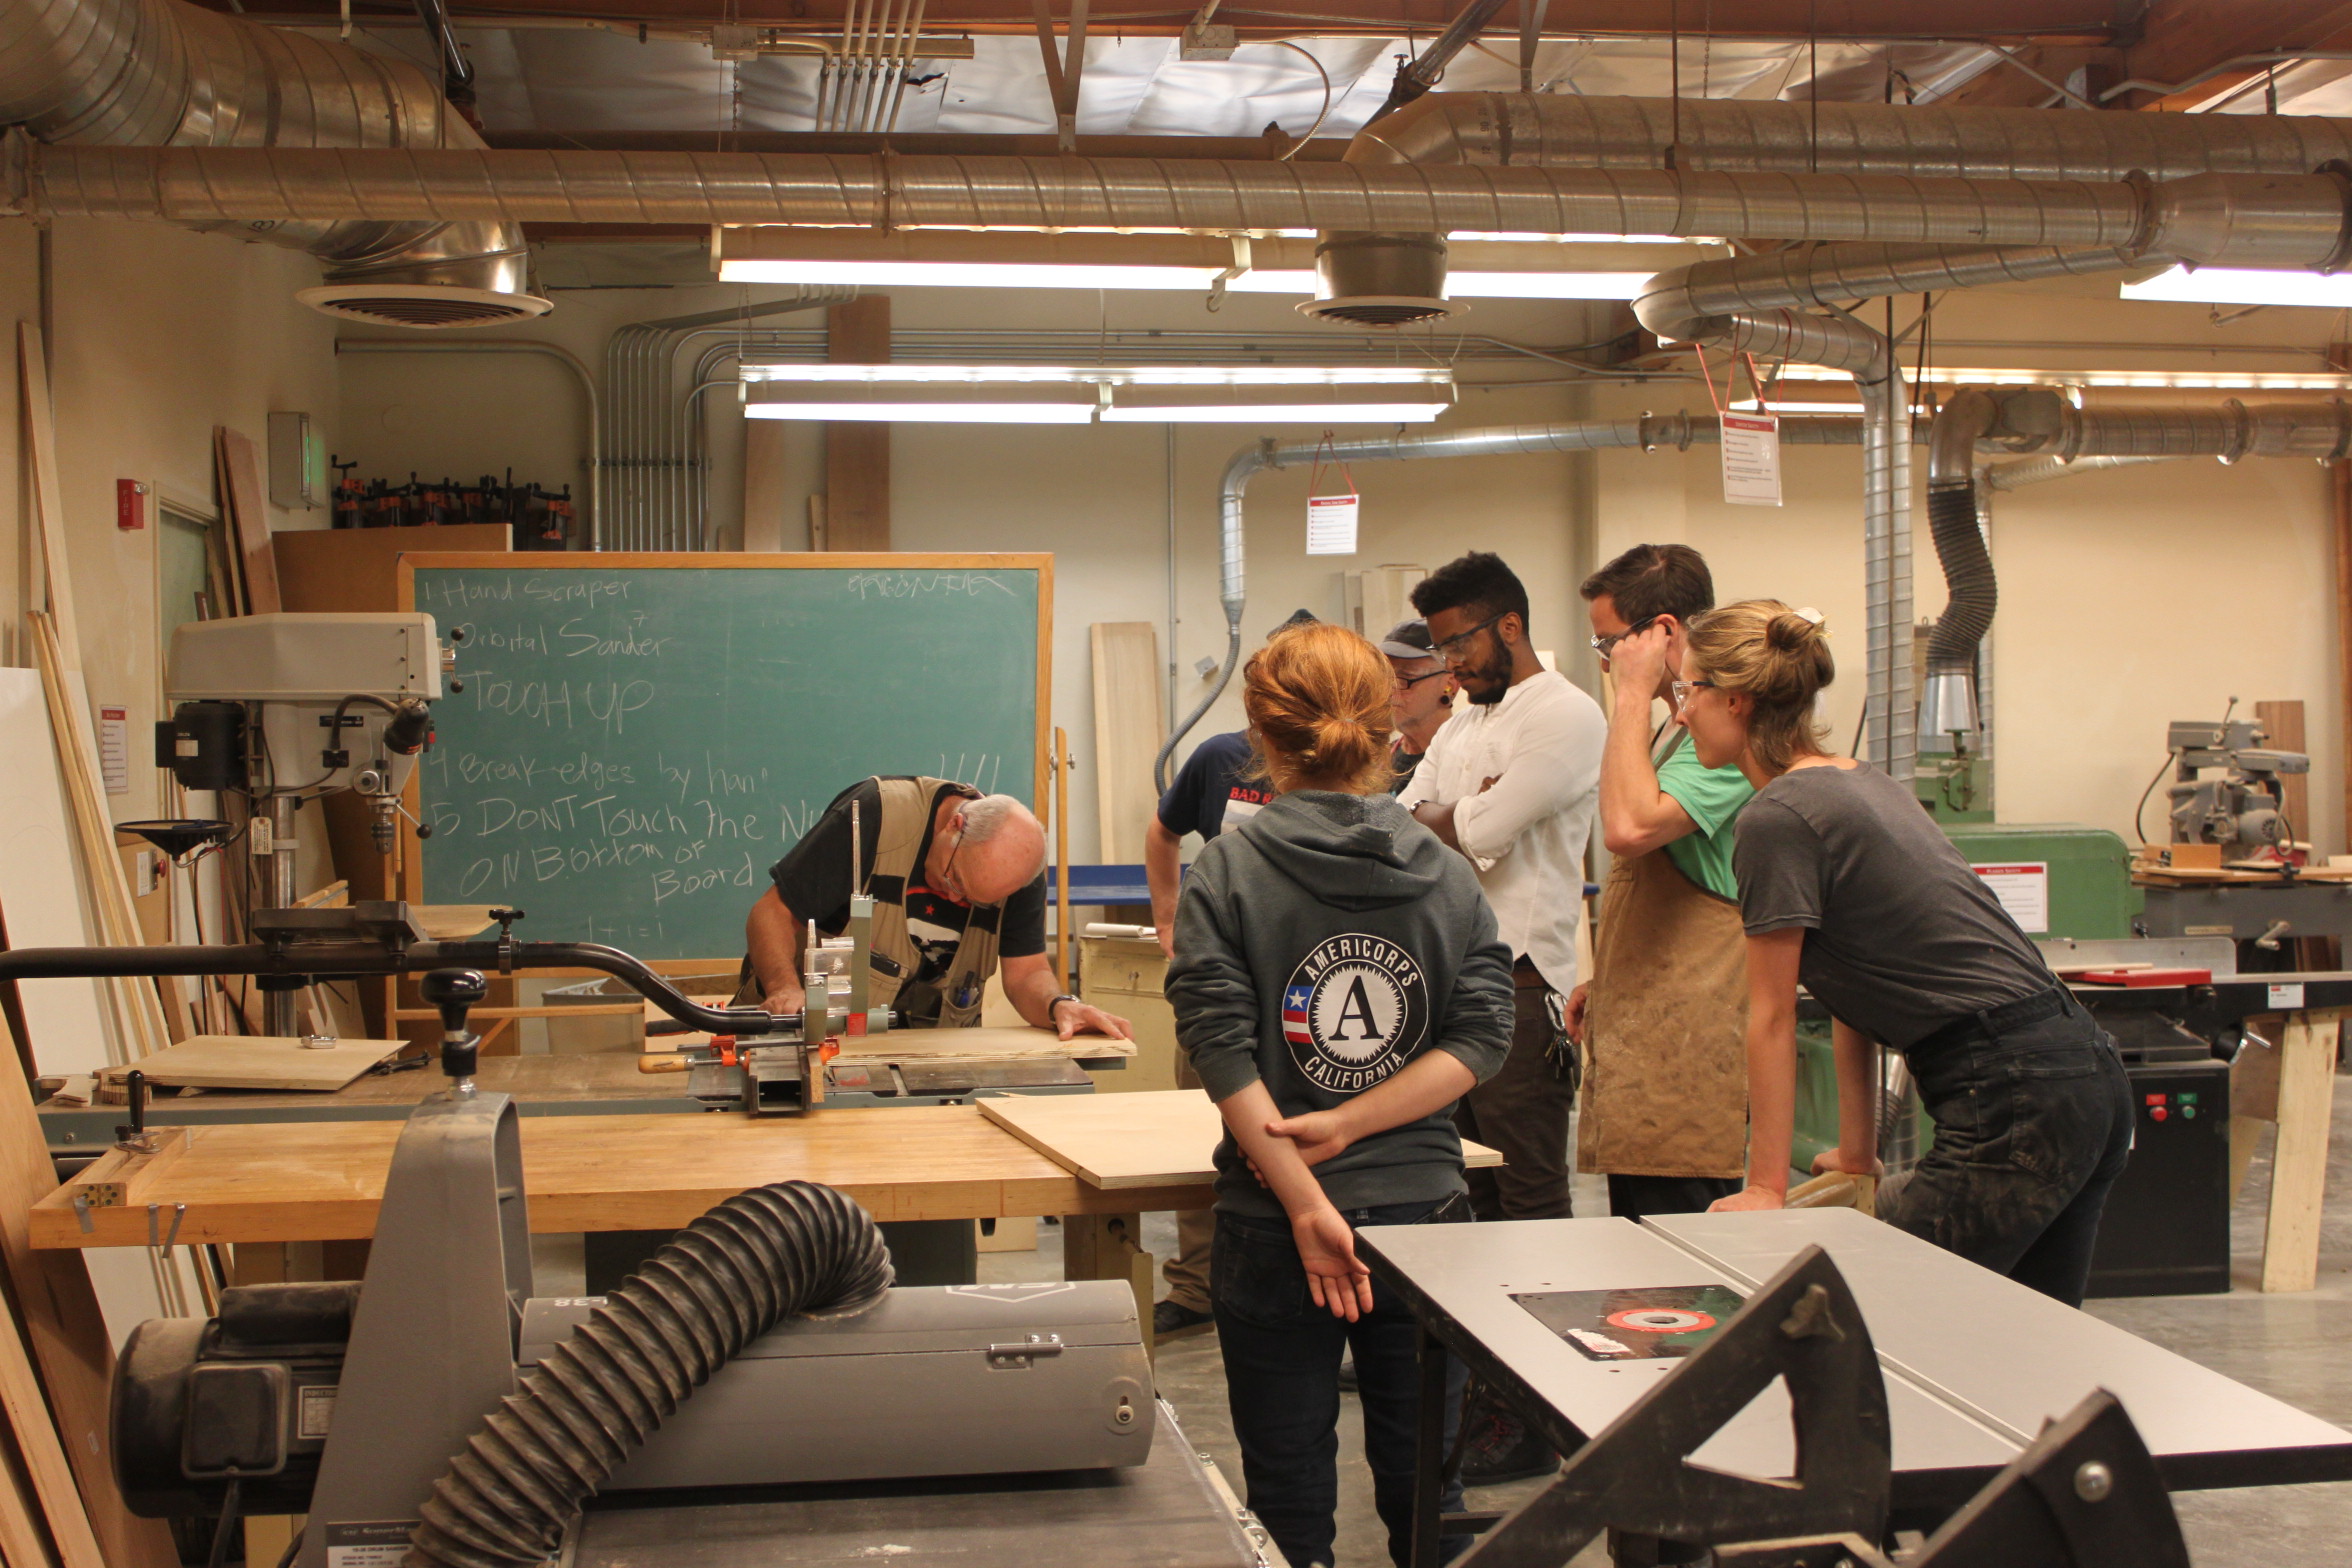 Raymond Cash leads the class in instruction before students disburse throughout the woodshop to work on their individual projects. Photo taken by Bethaney Lee on Nov. 6, 2017. 